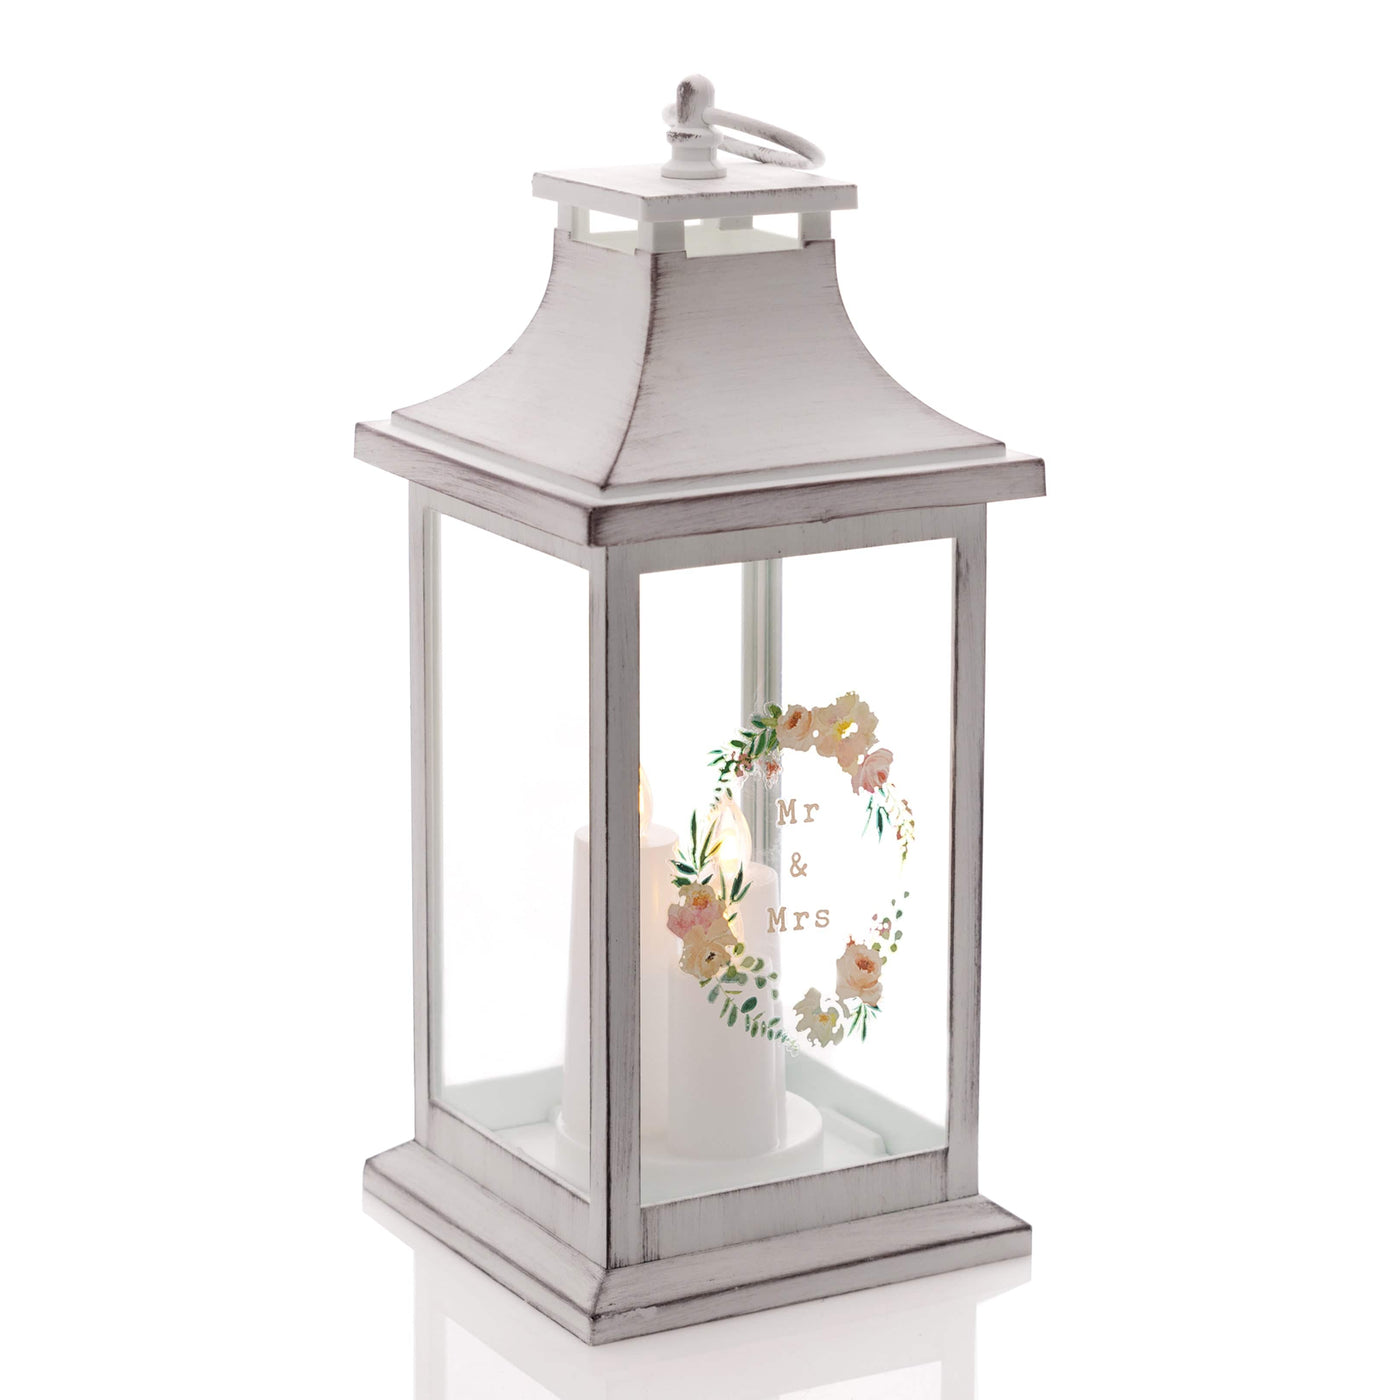 Widdop Gifts Candles & Diffusers Floral Mr and Mrs Wedding Lantern Decoration